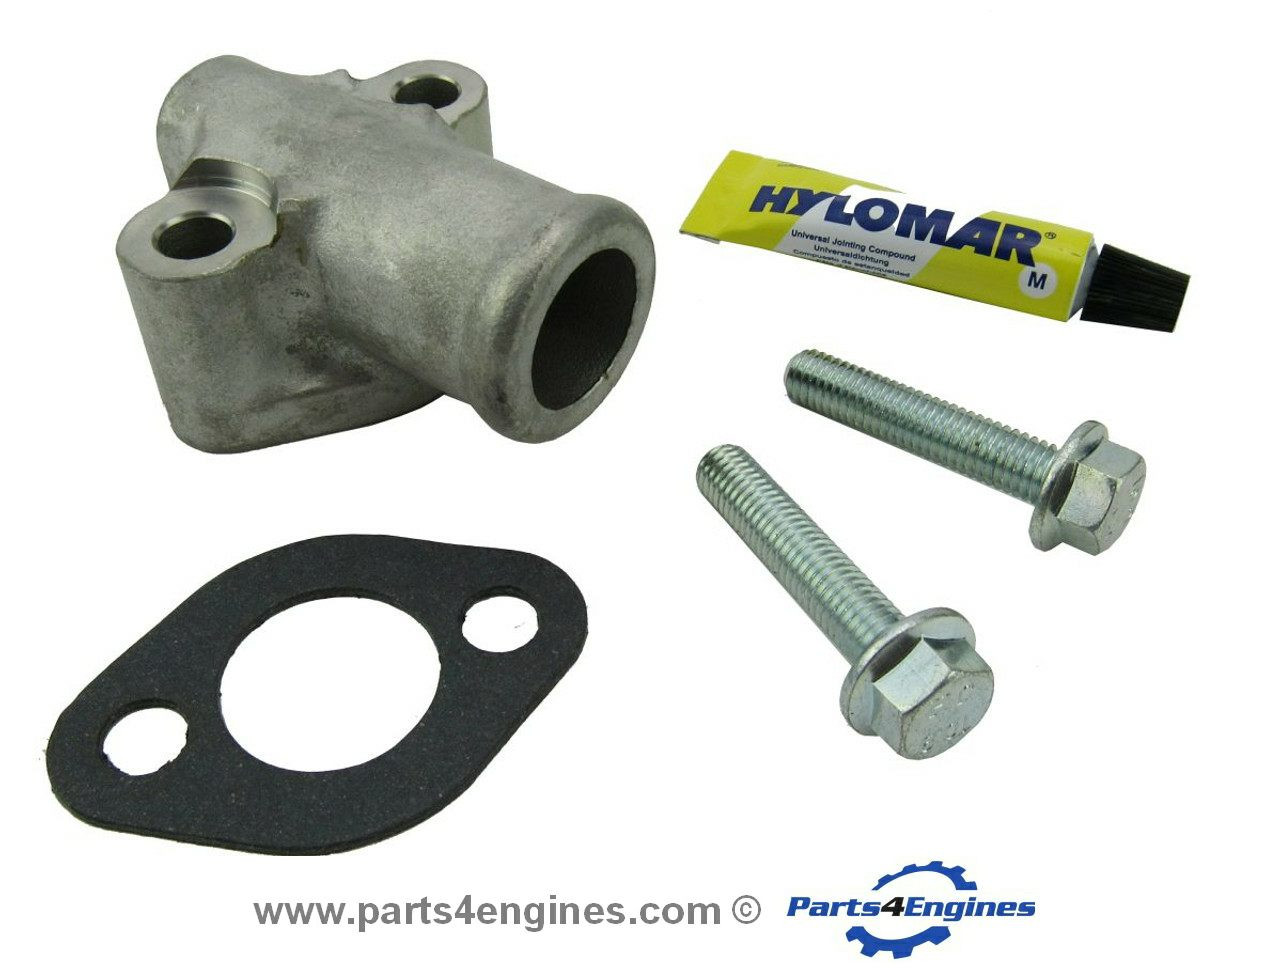 Perkins M80T exhaust elbow connector kit from parts4engines.com